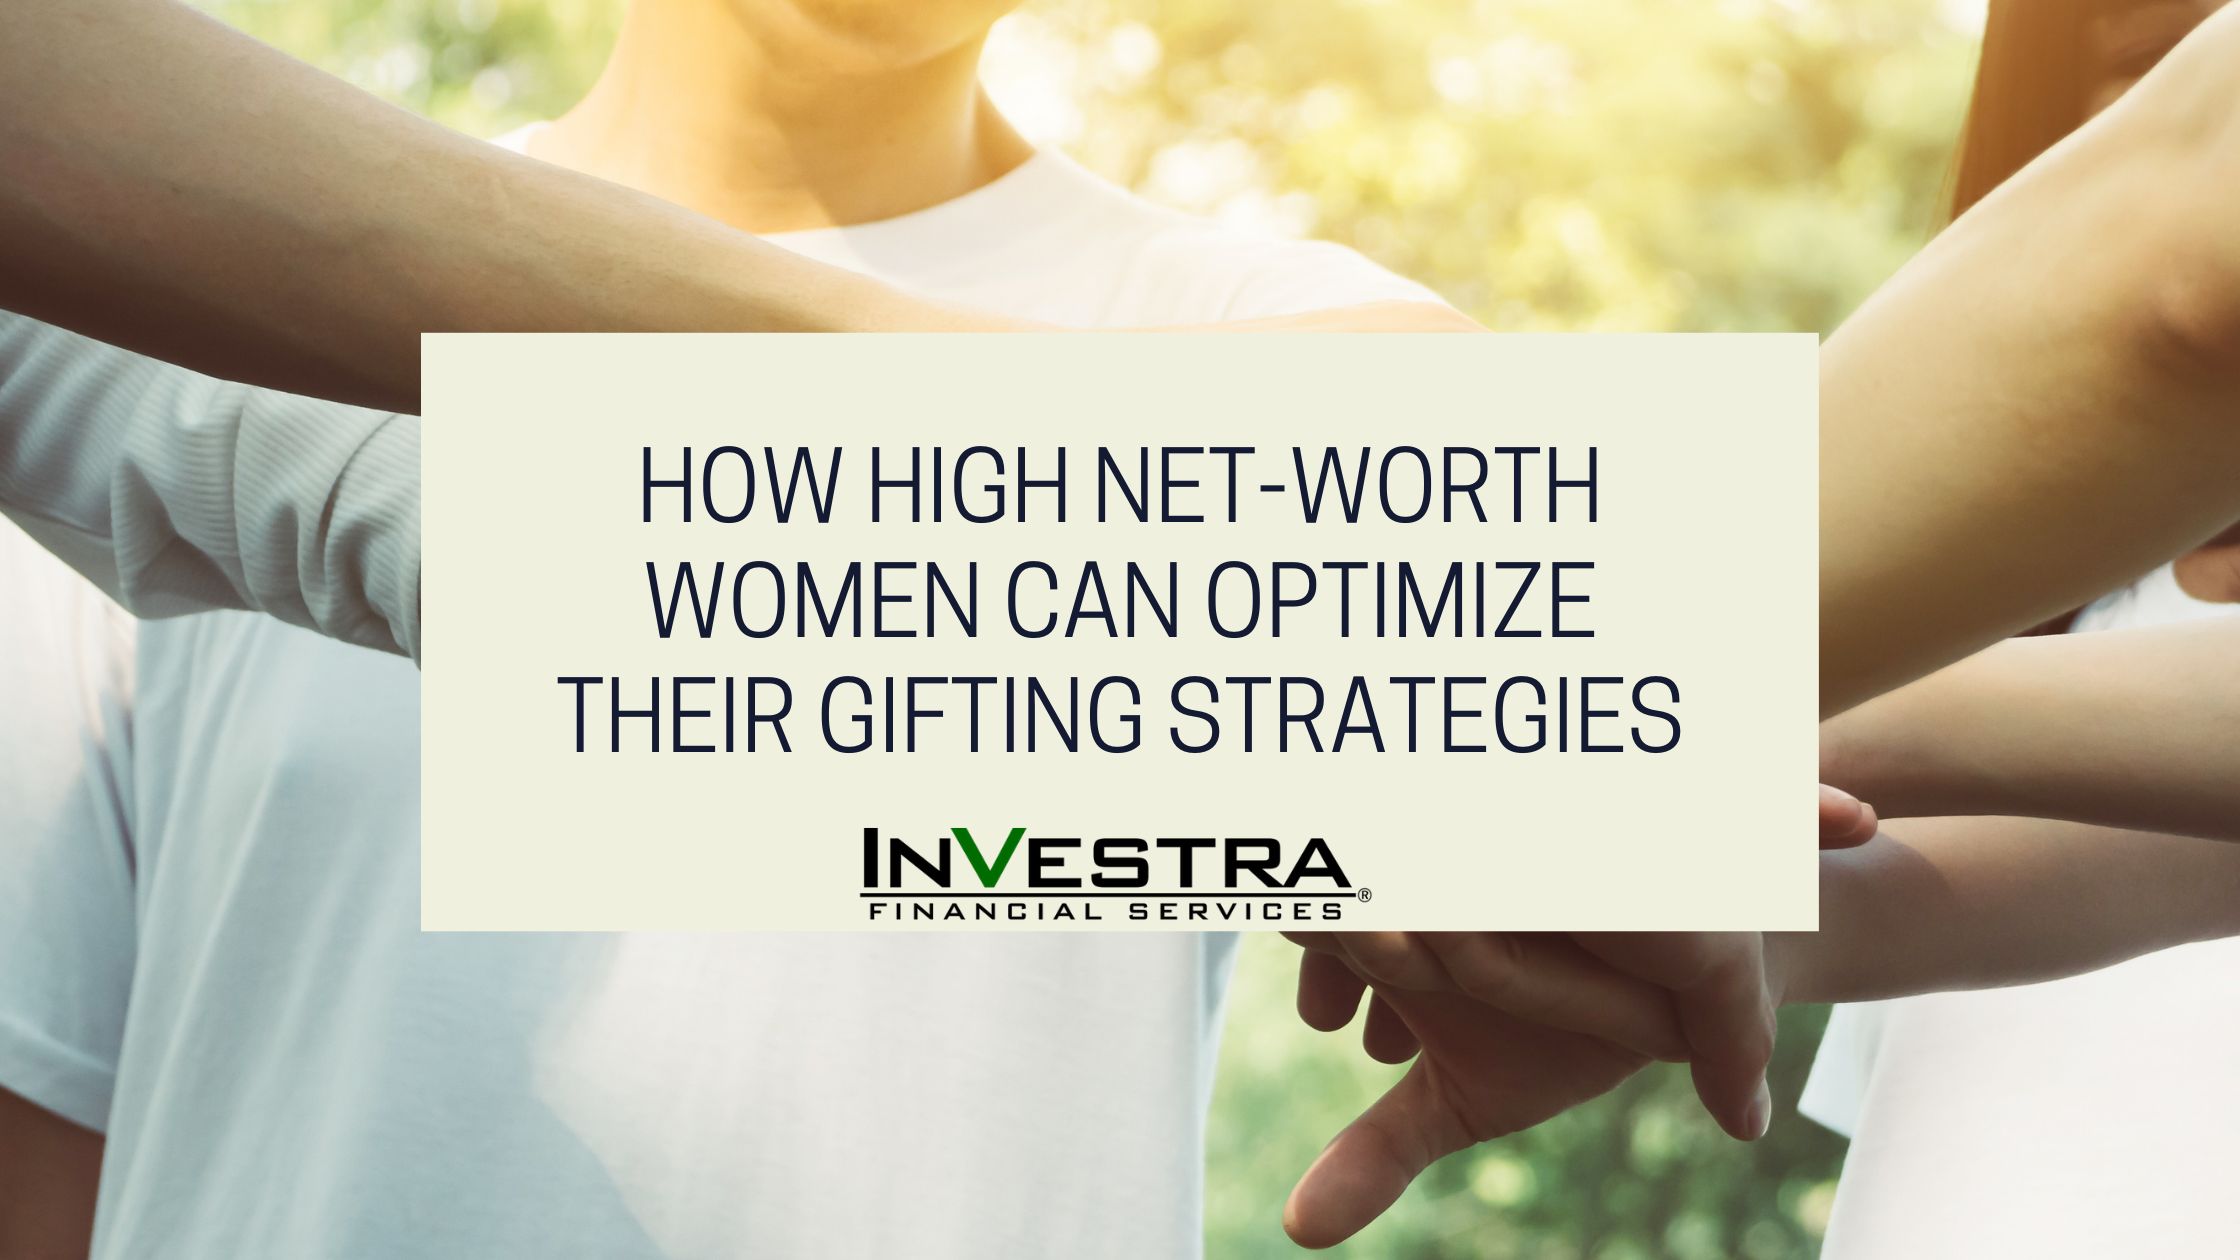 How High Net-Worth Women Can Optimize Their Gifting Strategies